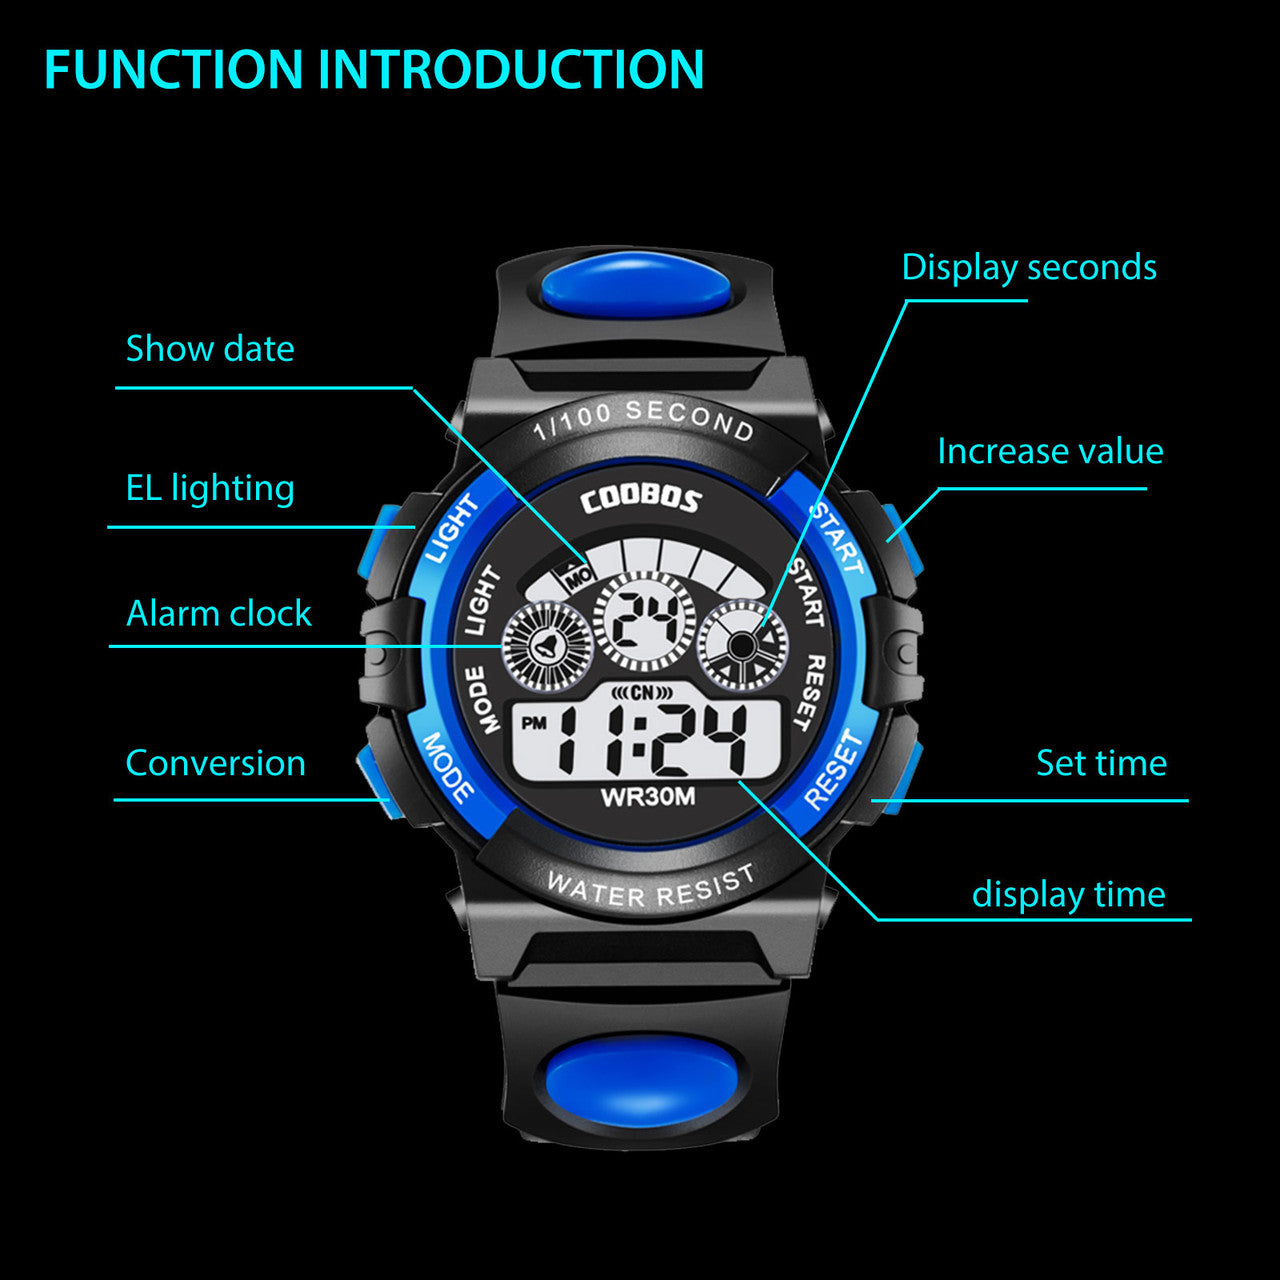 Multi-Functional Digital Children Kids Watches Waterproof Outdoor Wristwatches with Back Light Stopwatch Alarm for Boys, Girls